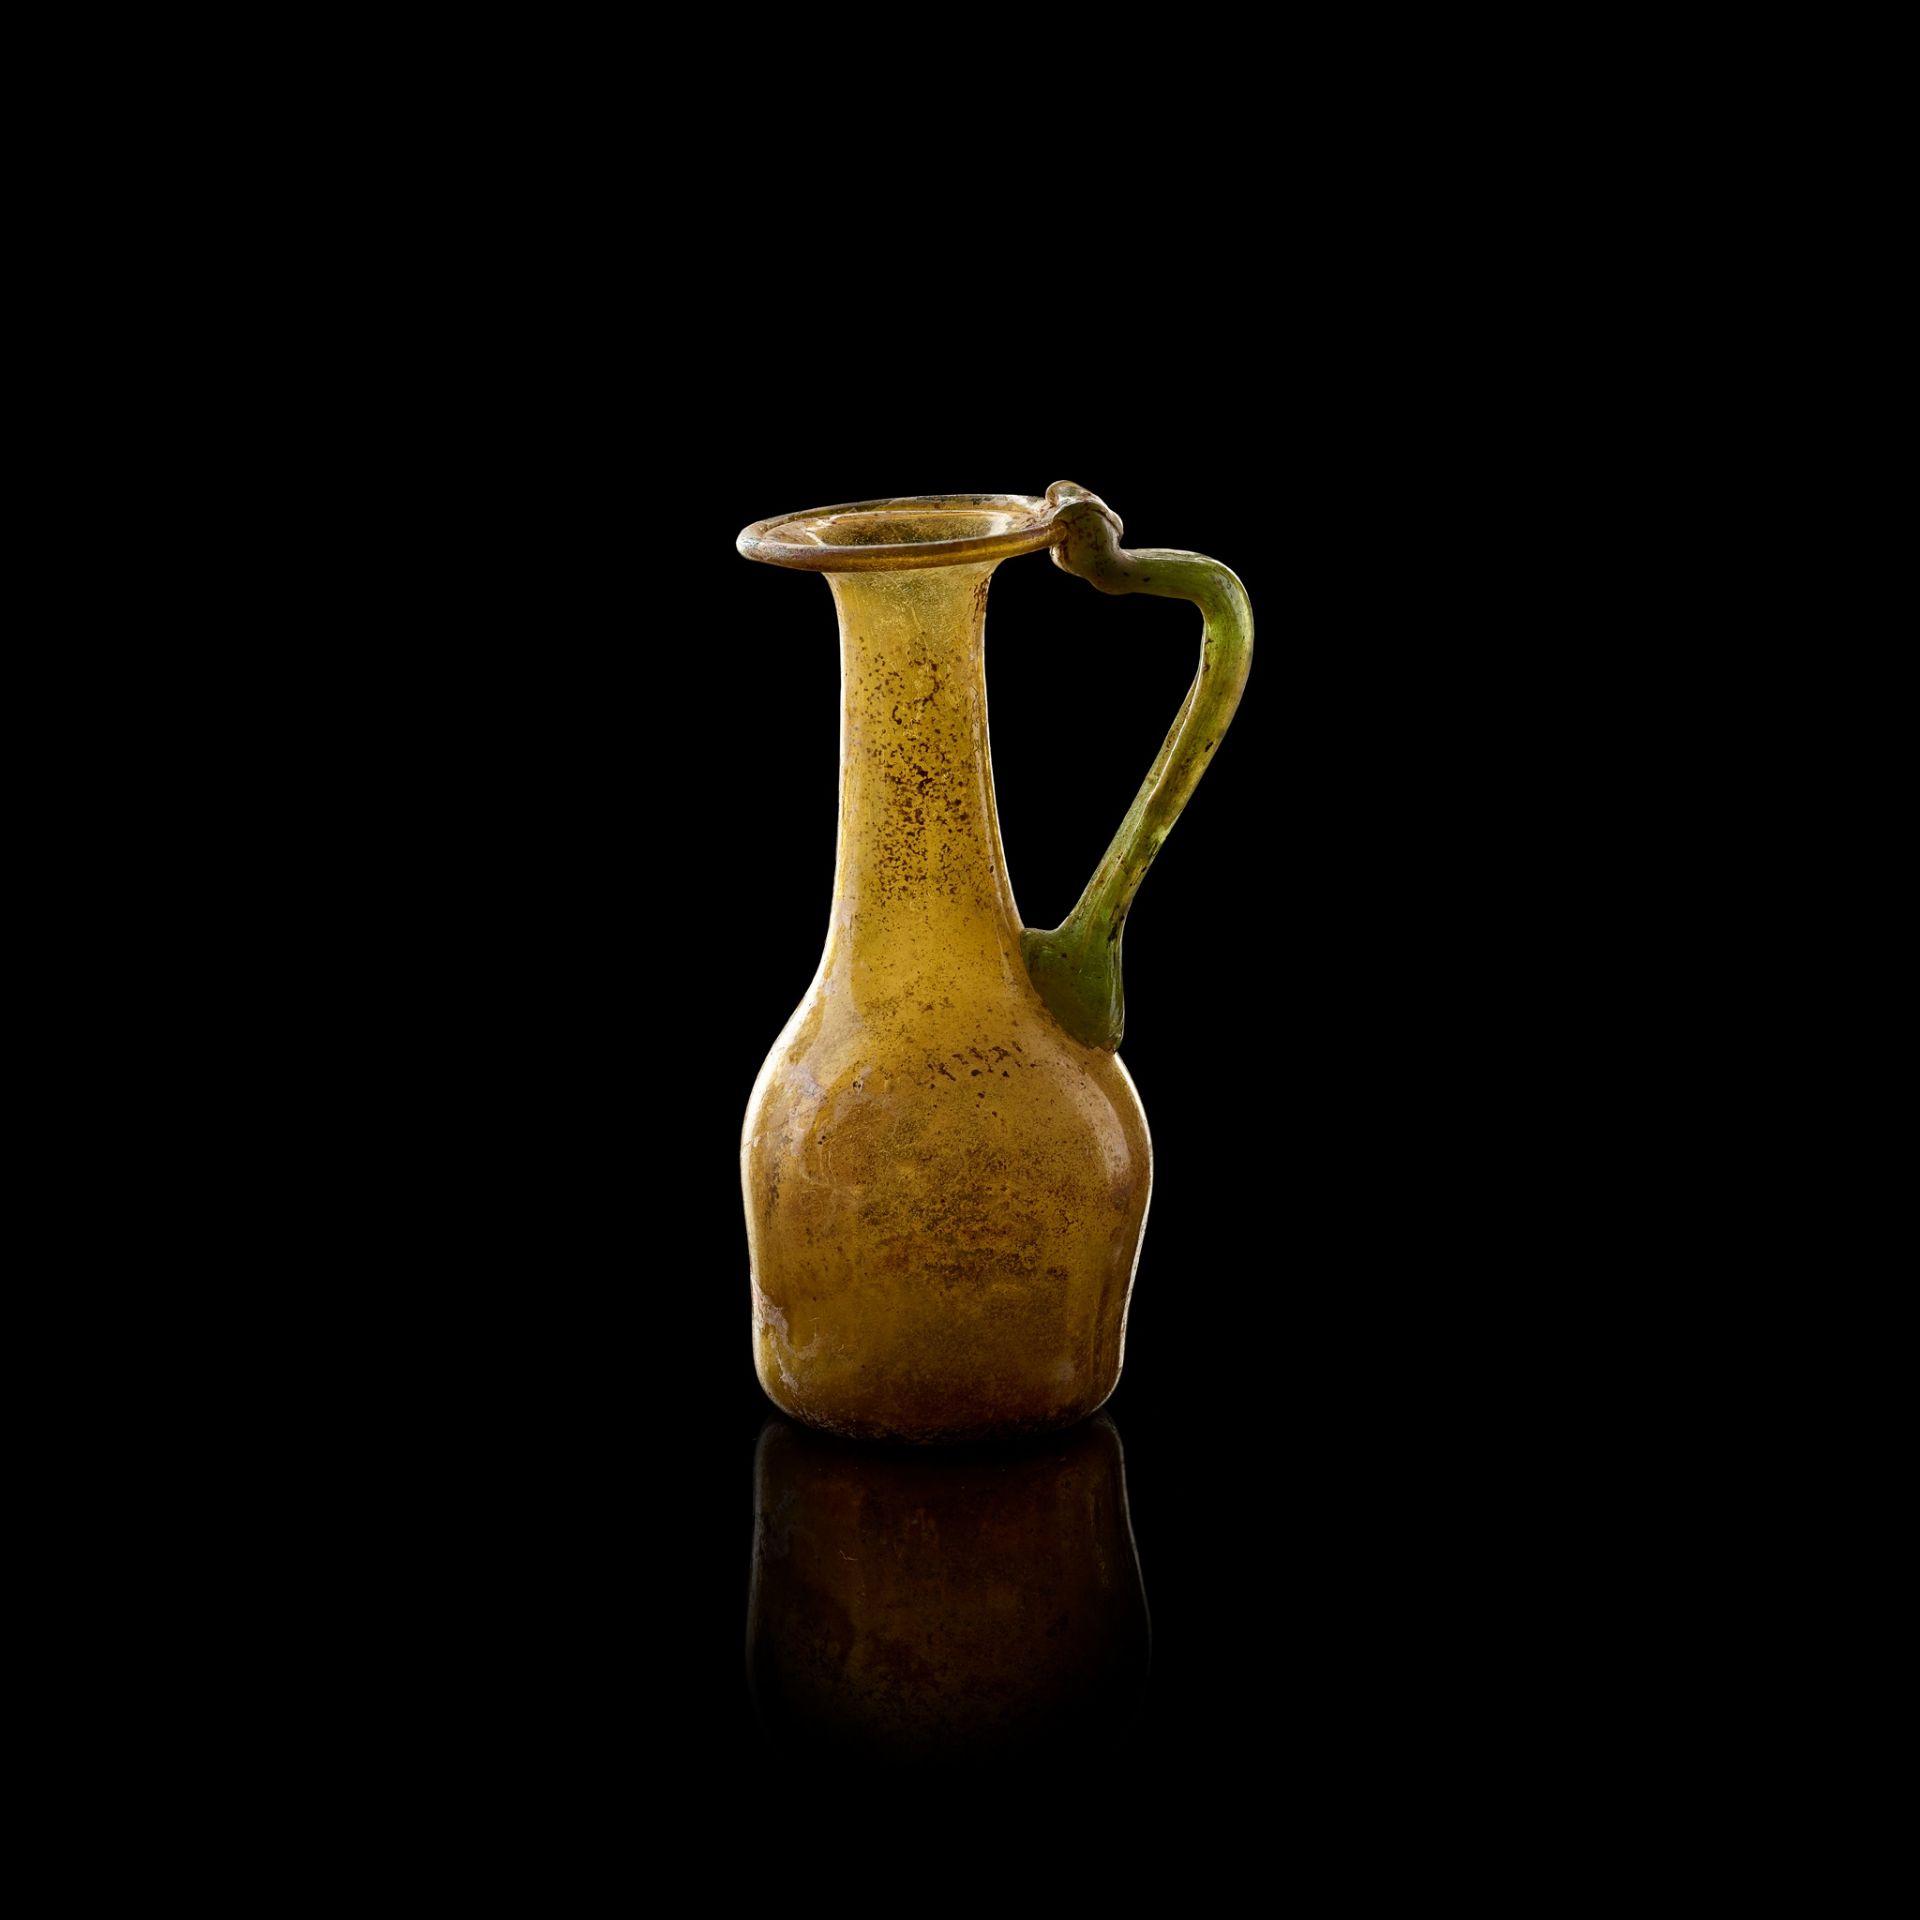 ROMAN GLASS AMBER JUG EUROPE OR NEAR EAST, 3RD - 4TH CENTURY A.D.